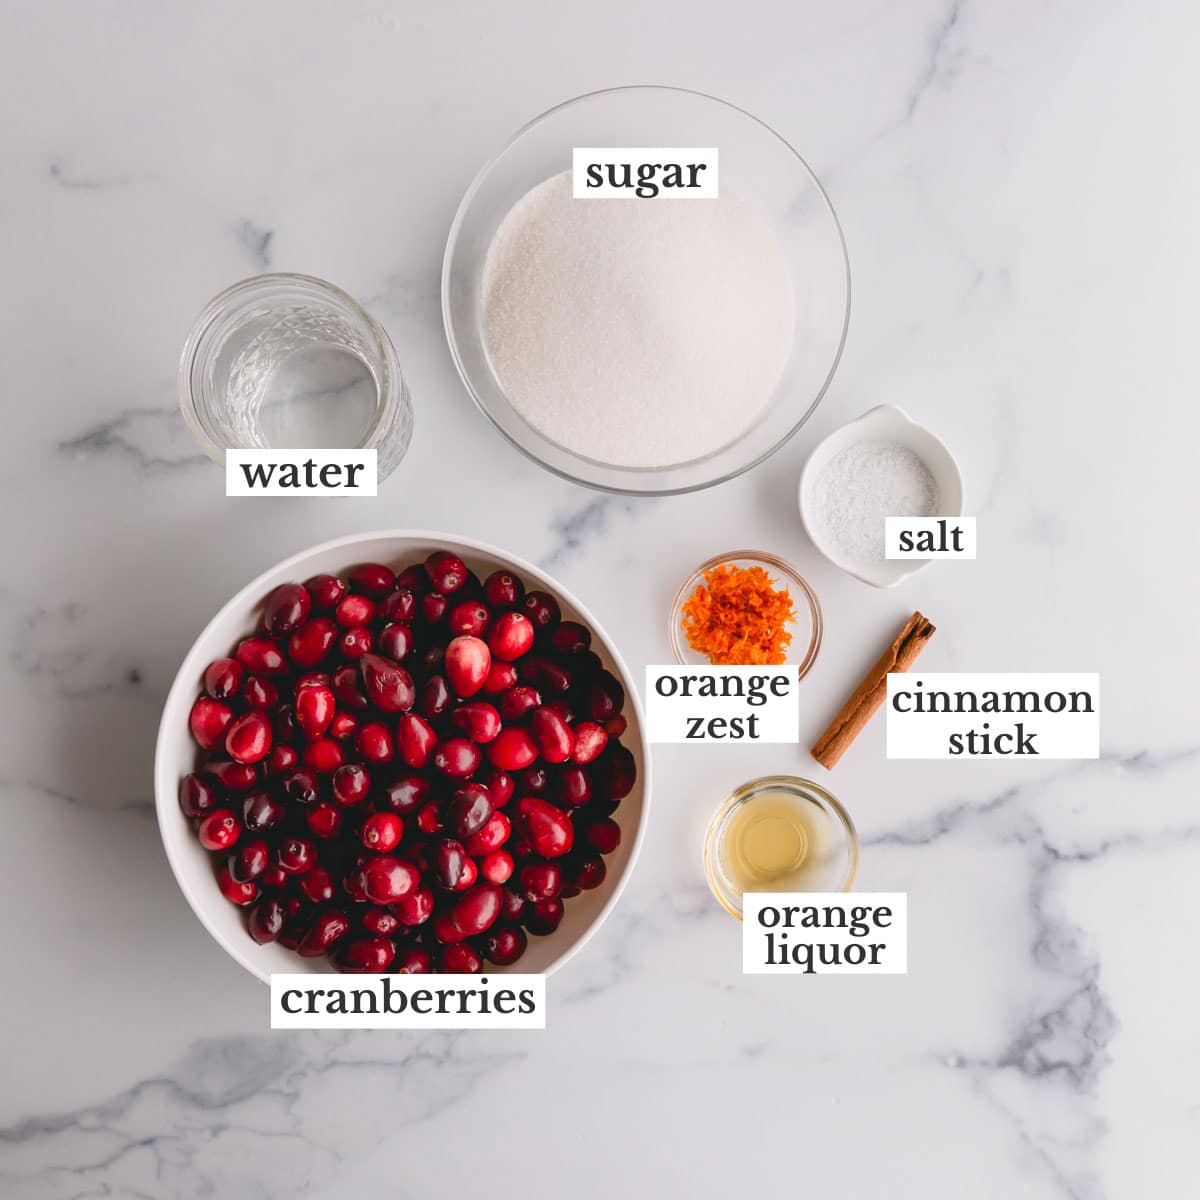 Ingredients for cranberry sauce.